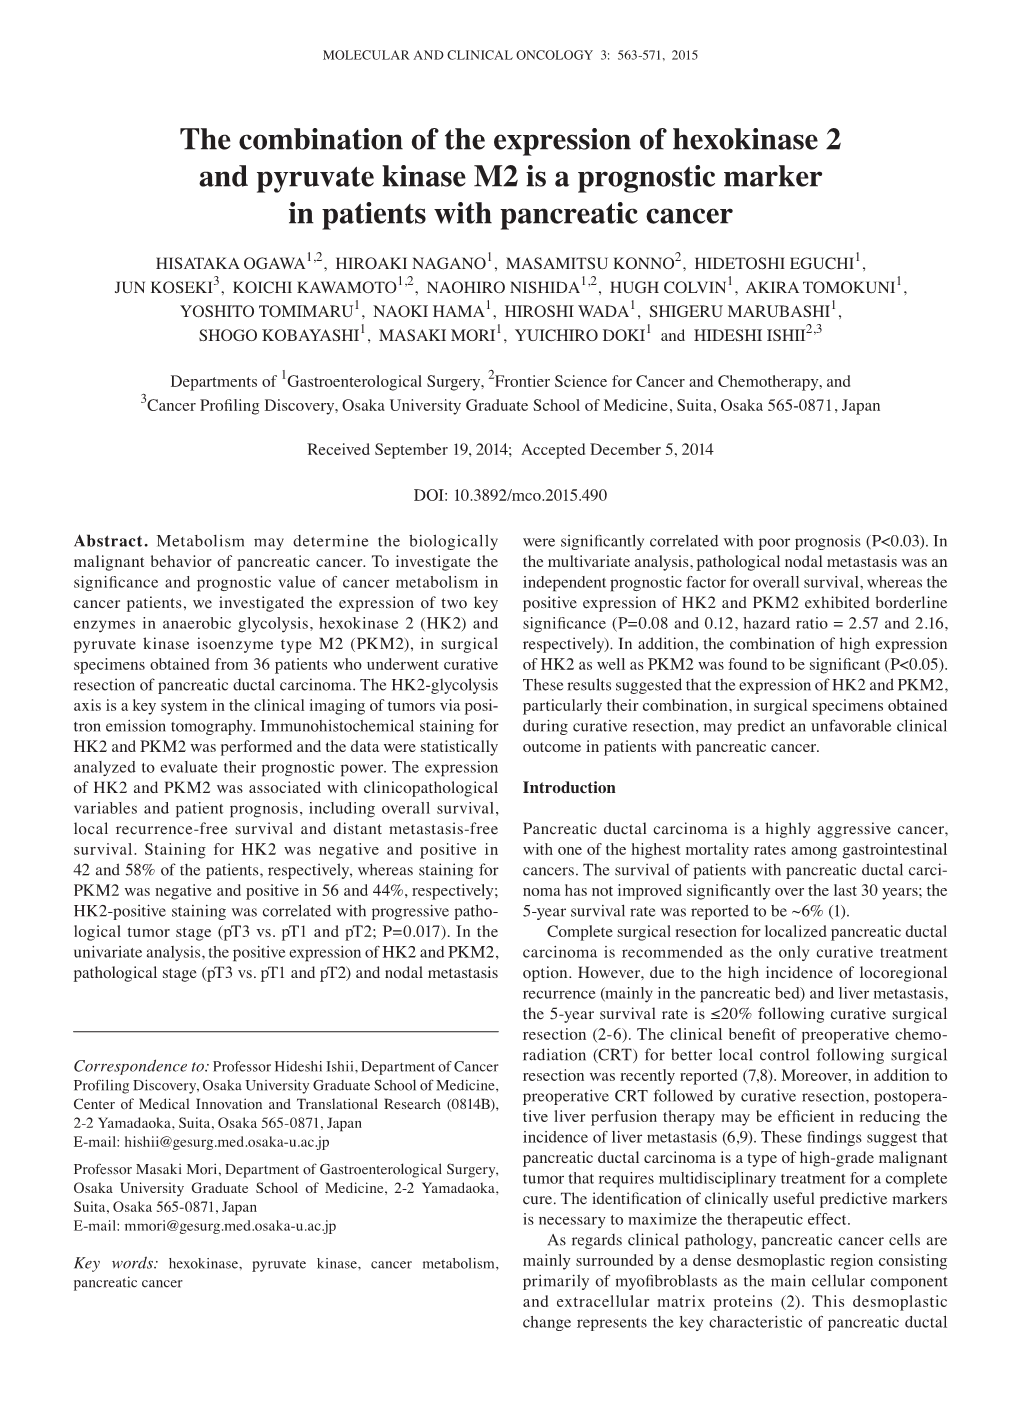 The Combination of the Expression of Hexokinase 2 and Pyruvate Kinase M2 Is a Prognostic Marker in Patients with Pancreatic Cancer